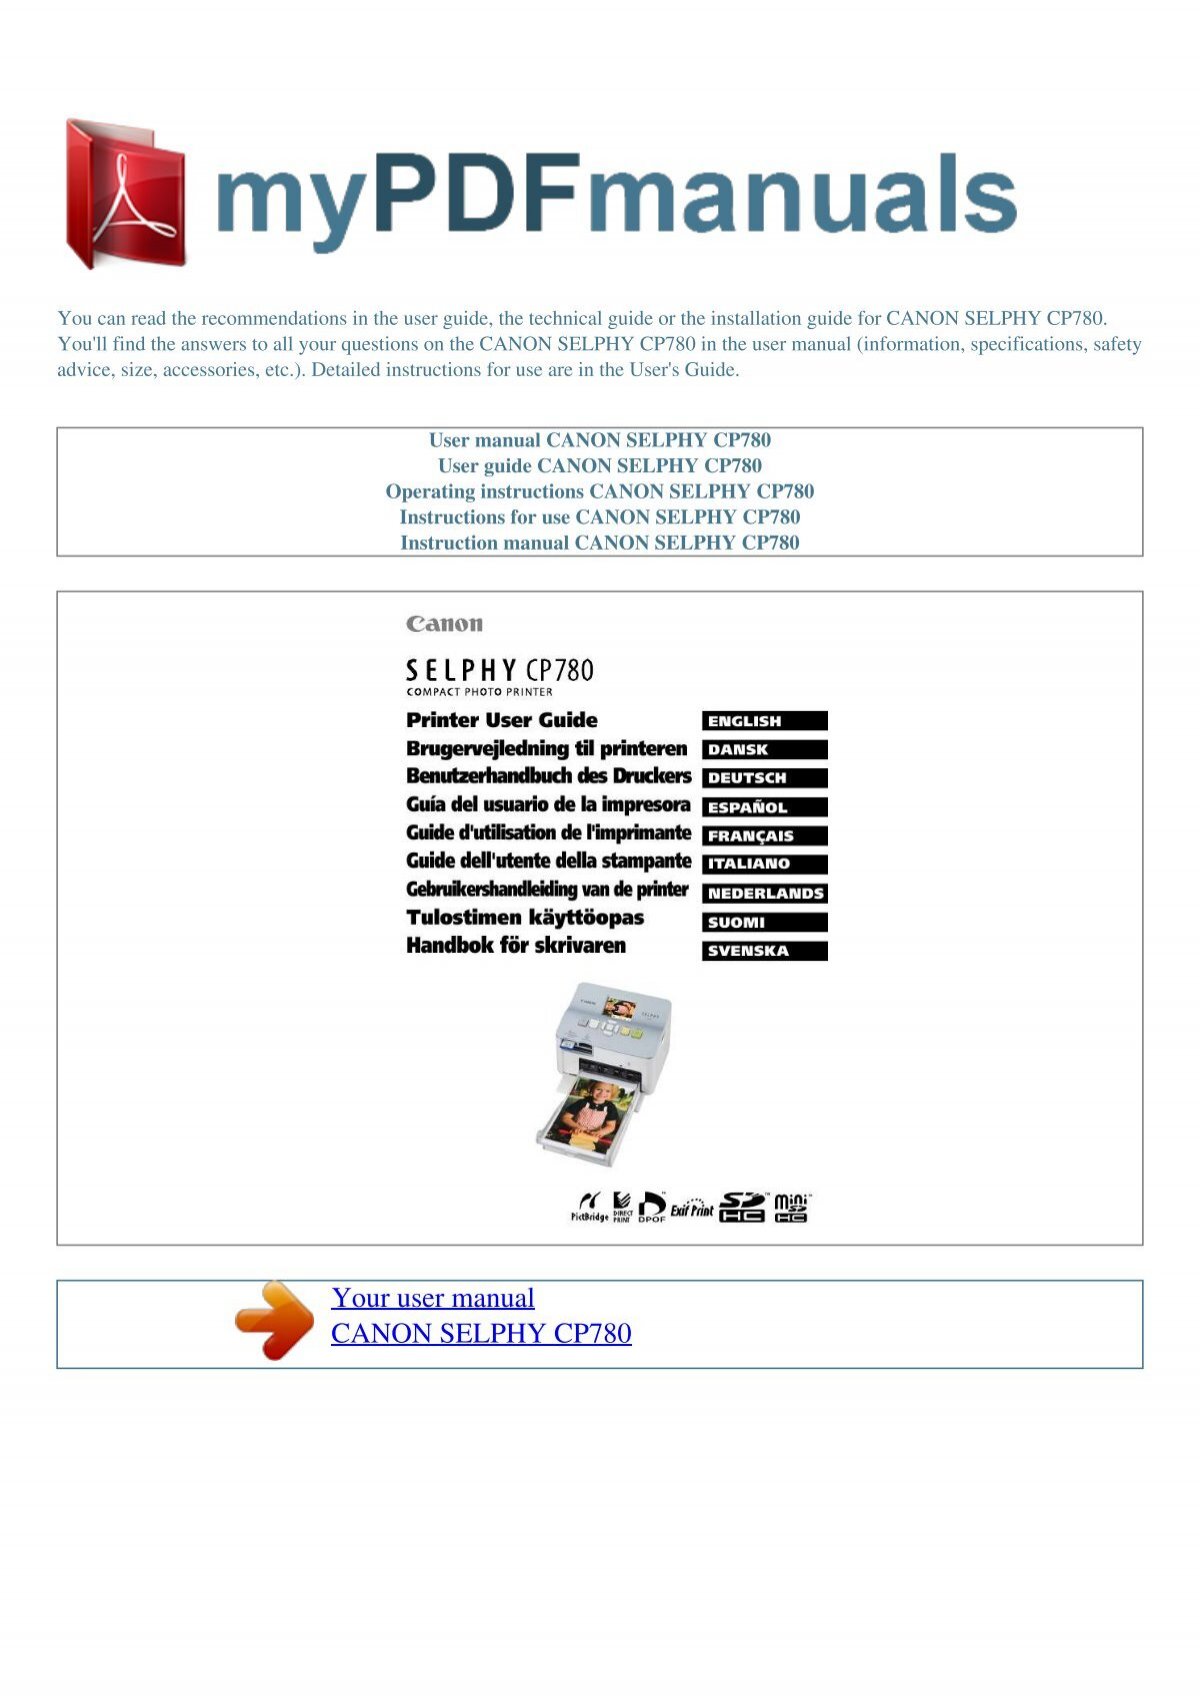 User manual CANON SELPHY CP780 - MY PDF MANUALS